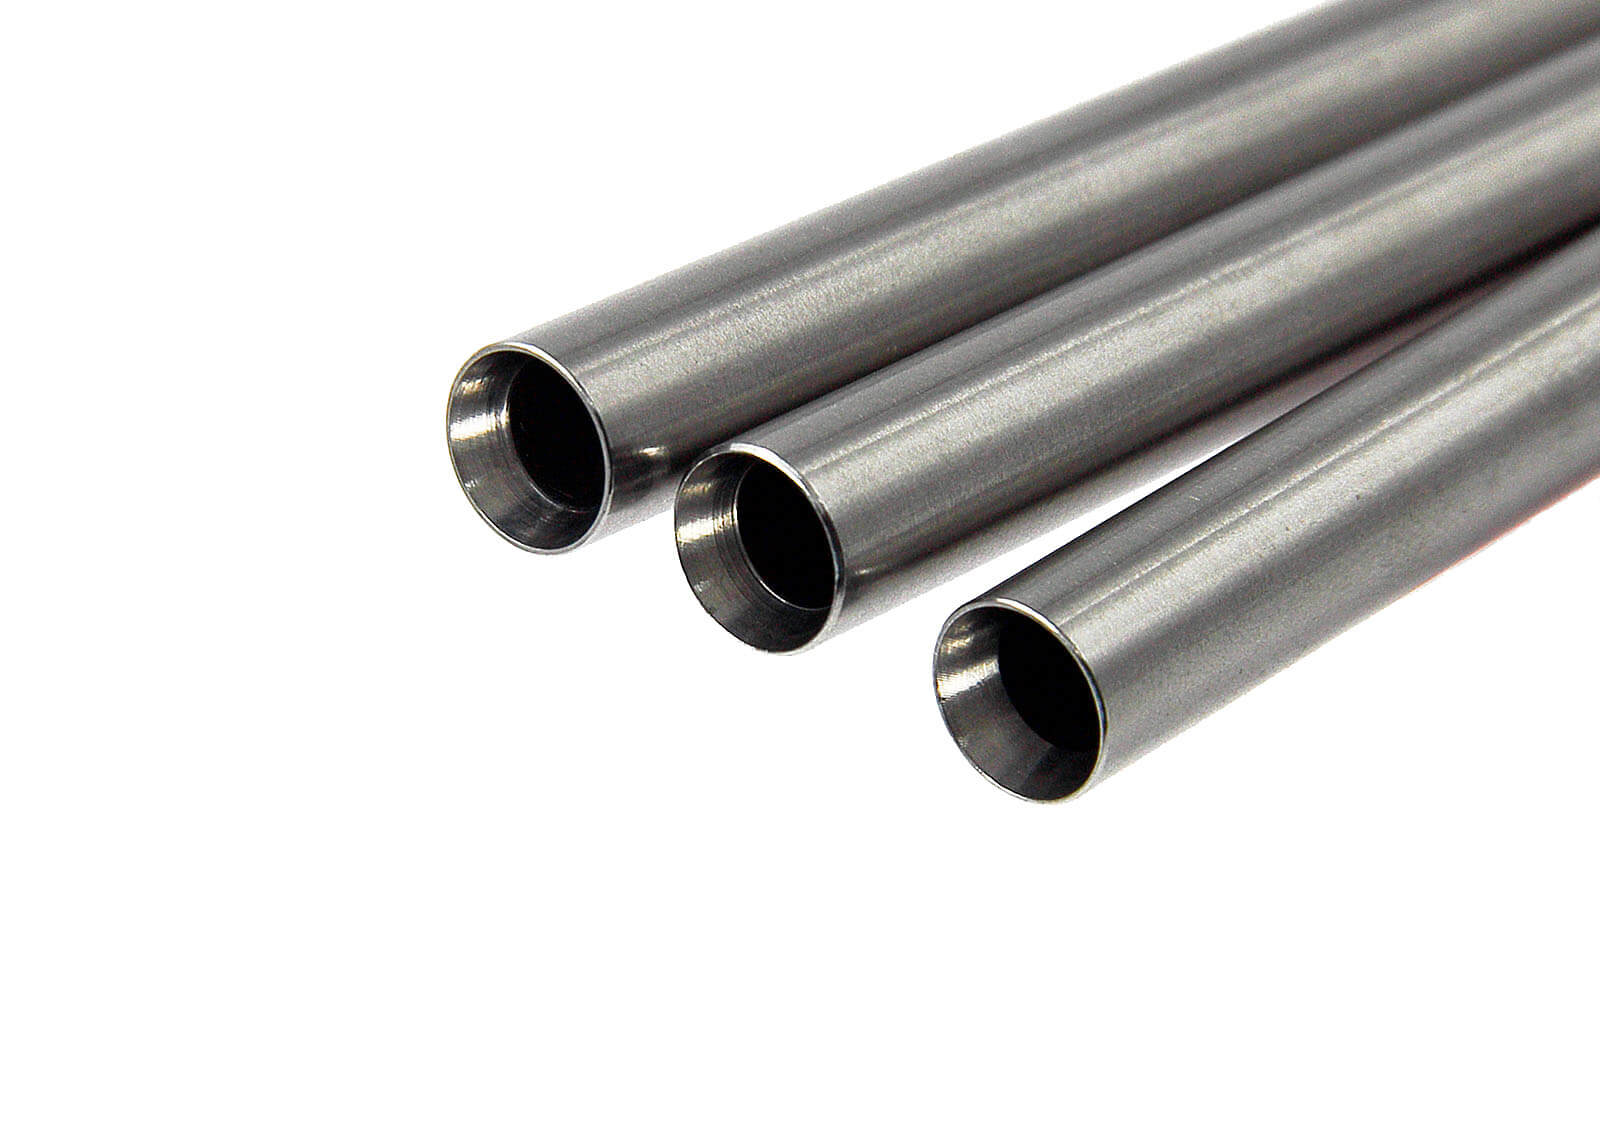 Stainless Steel 6.03mm Precision GBB Inner Barrel 74mm - Modify Airsoft Parts